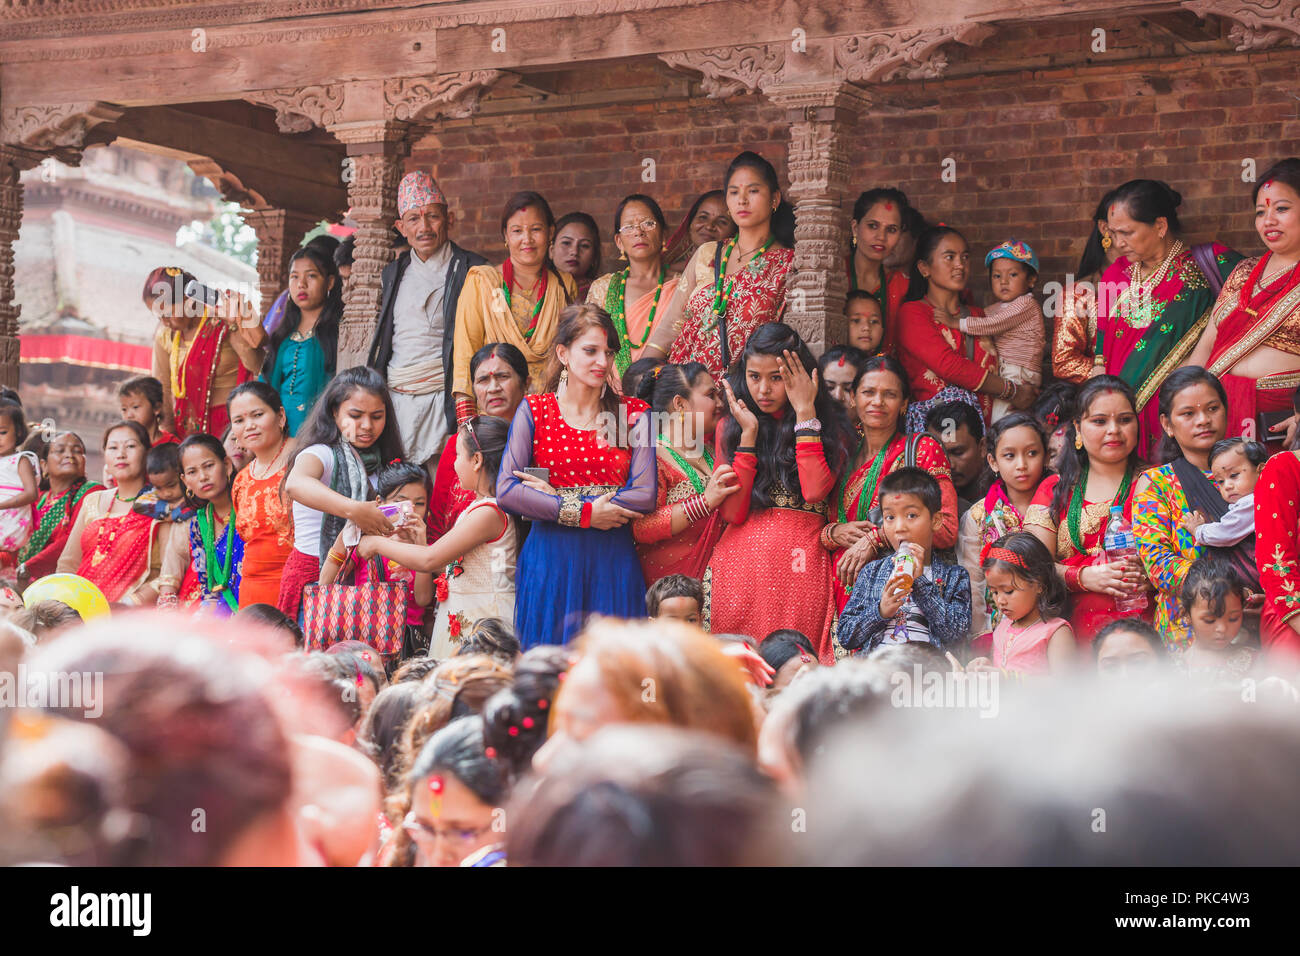 Kathmandu,Nepal - Sep 12,2018: Hindu Nepali Women at Kathmandu Durbar Square to celebrate Teej Festival in Kathmandu.Hindu Nepali Women fast and wish for a prosperous life of their spouse and family on this festival.The festivals for women, include dancing, singing, getting together with friends,, wearing red, green or orange clothes, sharing festive foods Credit: Nabaraj Regmi/Alamy Live News Stock Photo